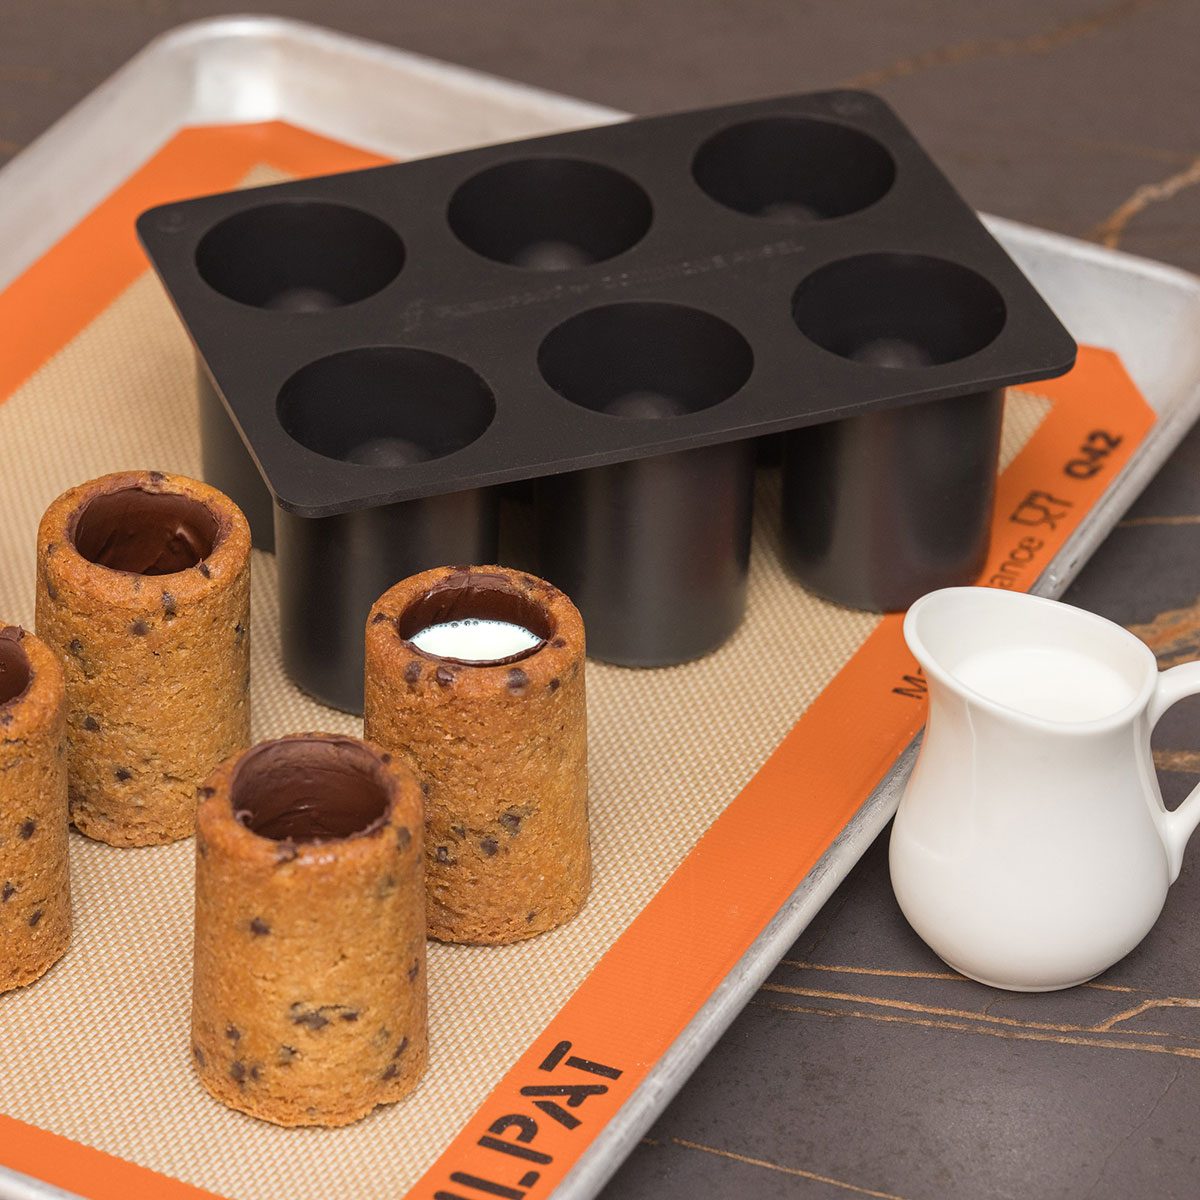 Challenger Breadware carves up new creation designed to deal with